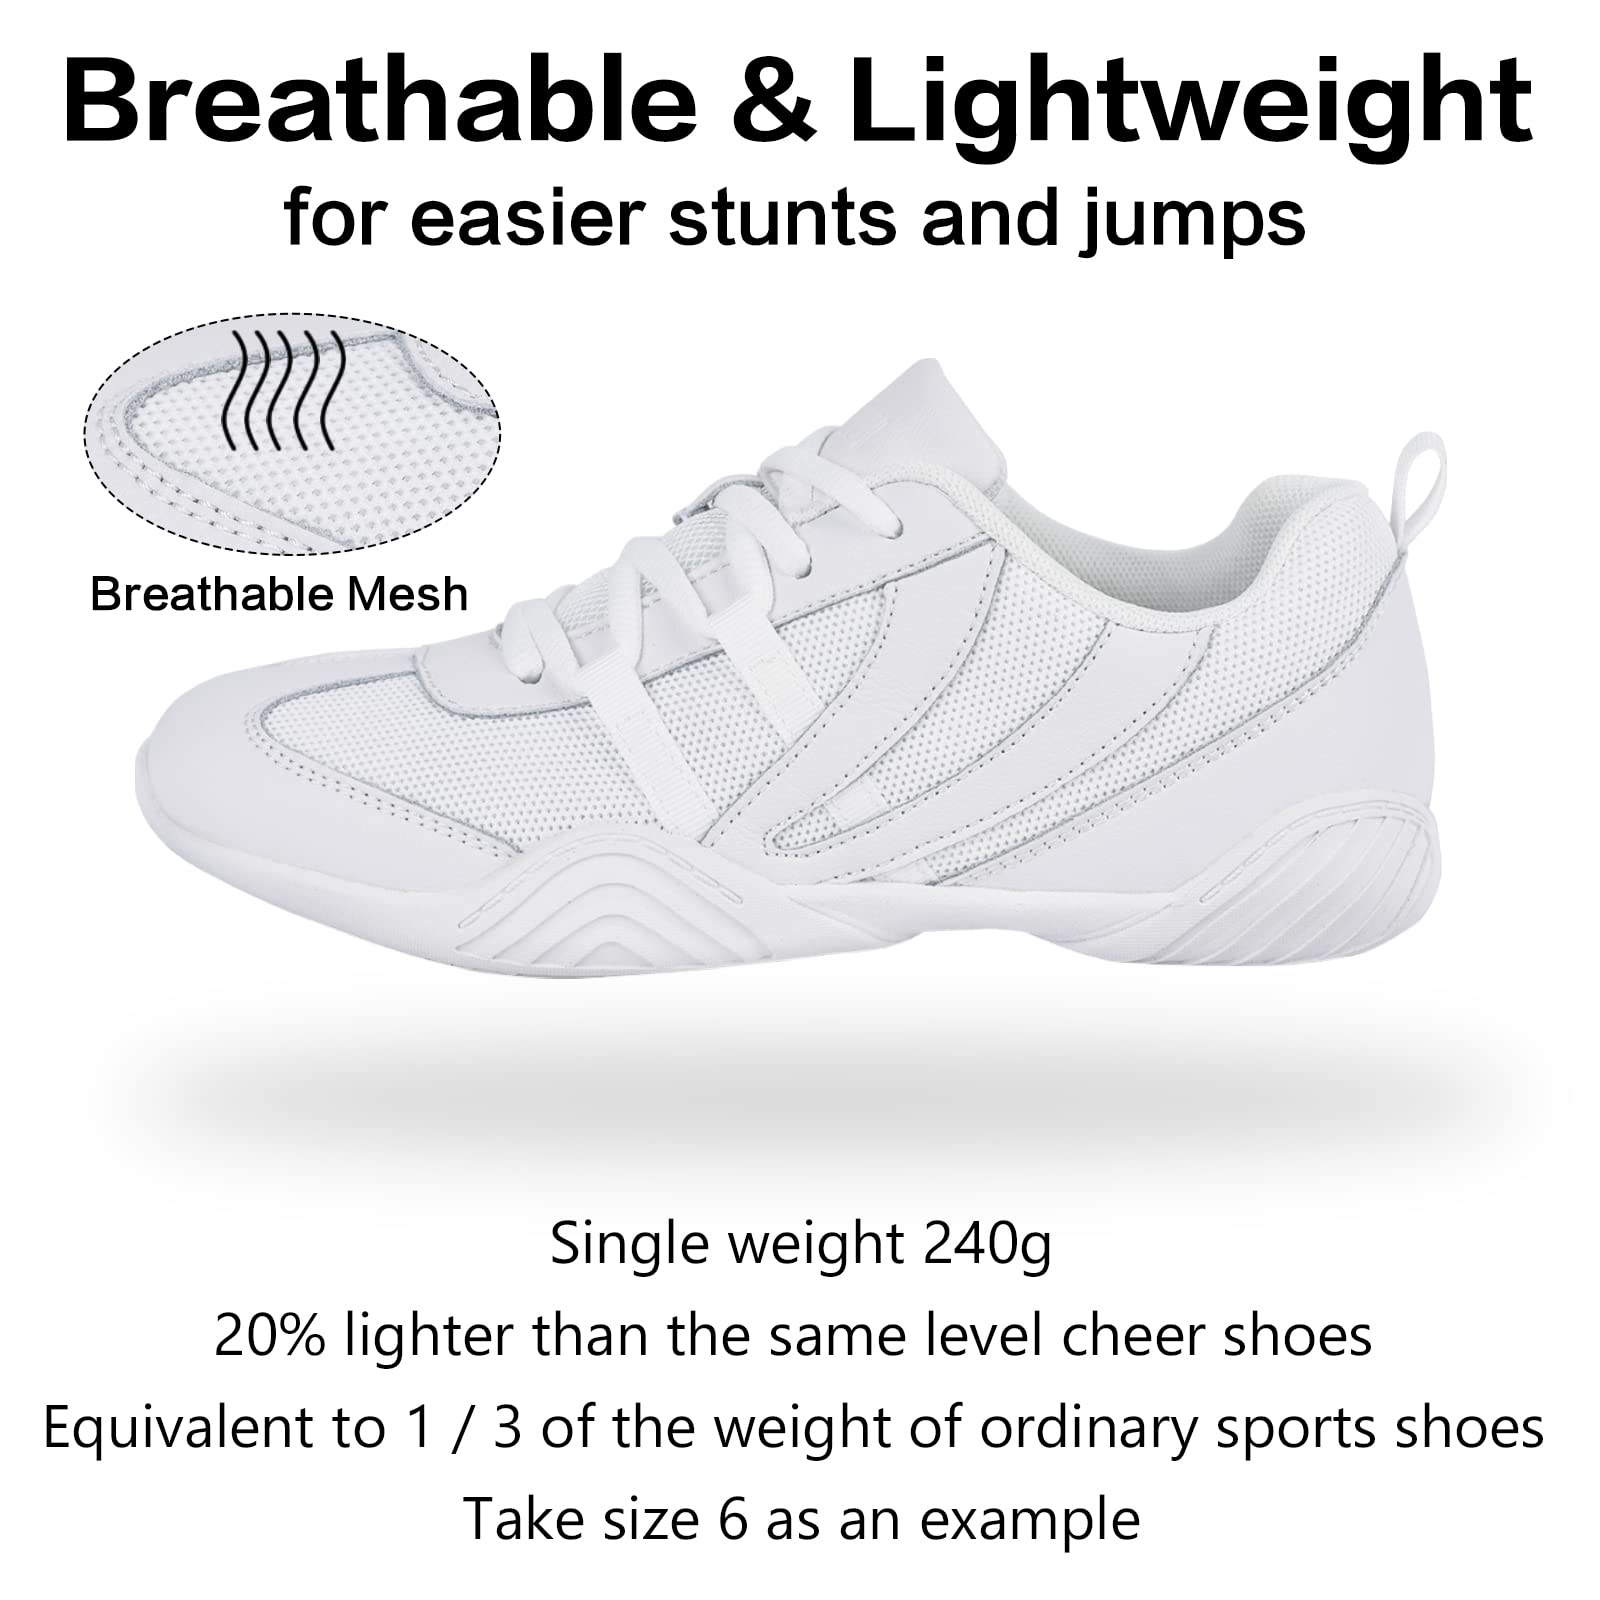 CADIDL Cheer Shoes Women Cheerleading Dance Shoes Tennis Athletic Flats Walking Sneakers for Girls White 7 (M) US